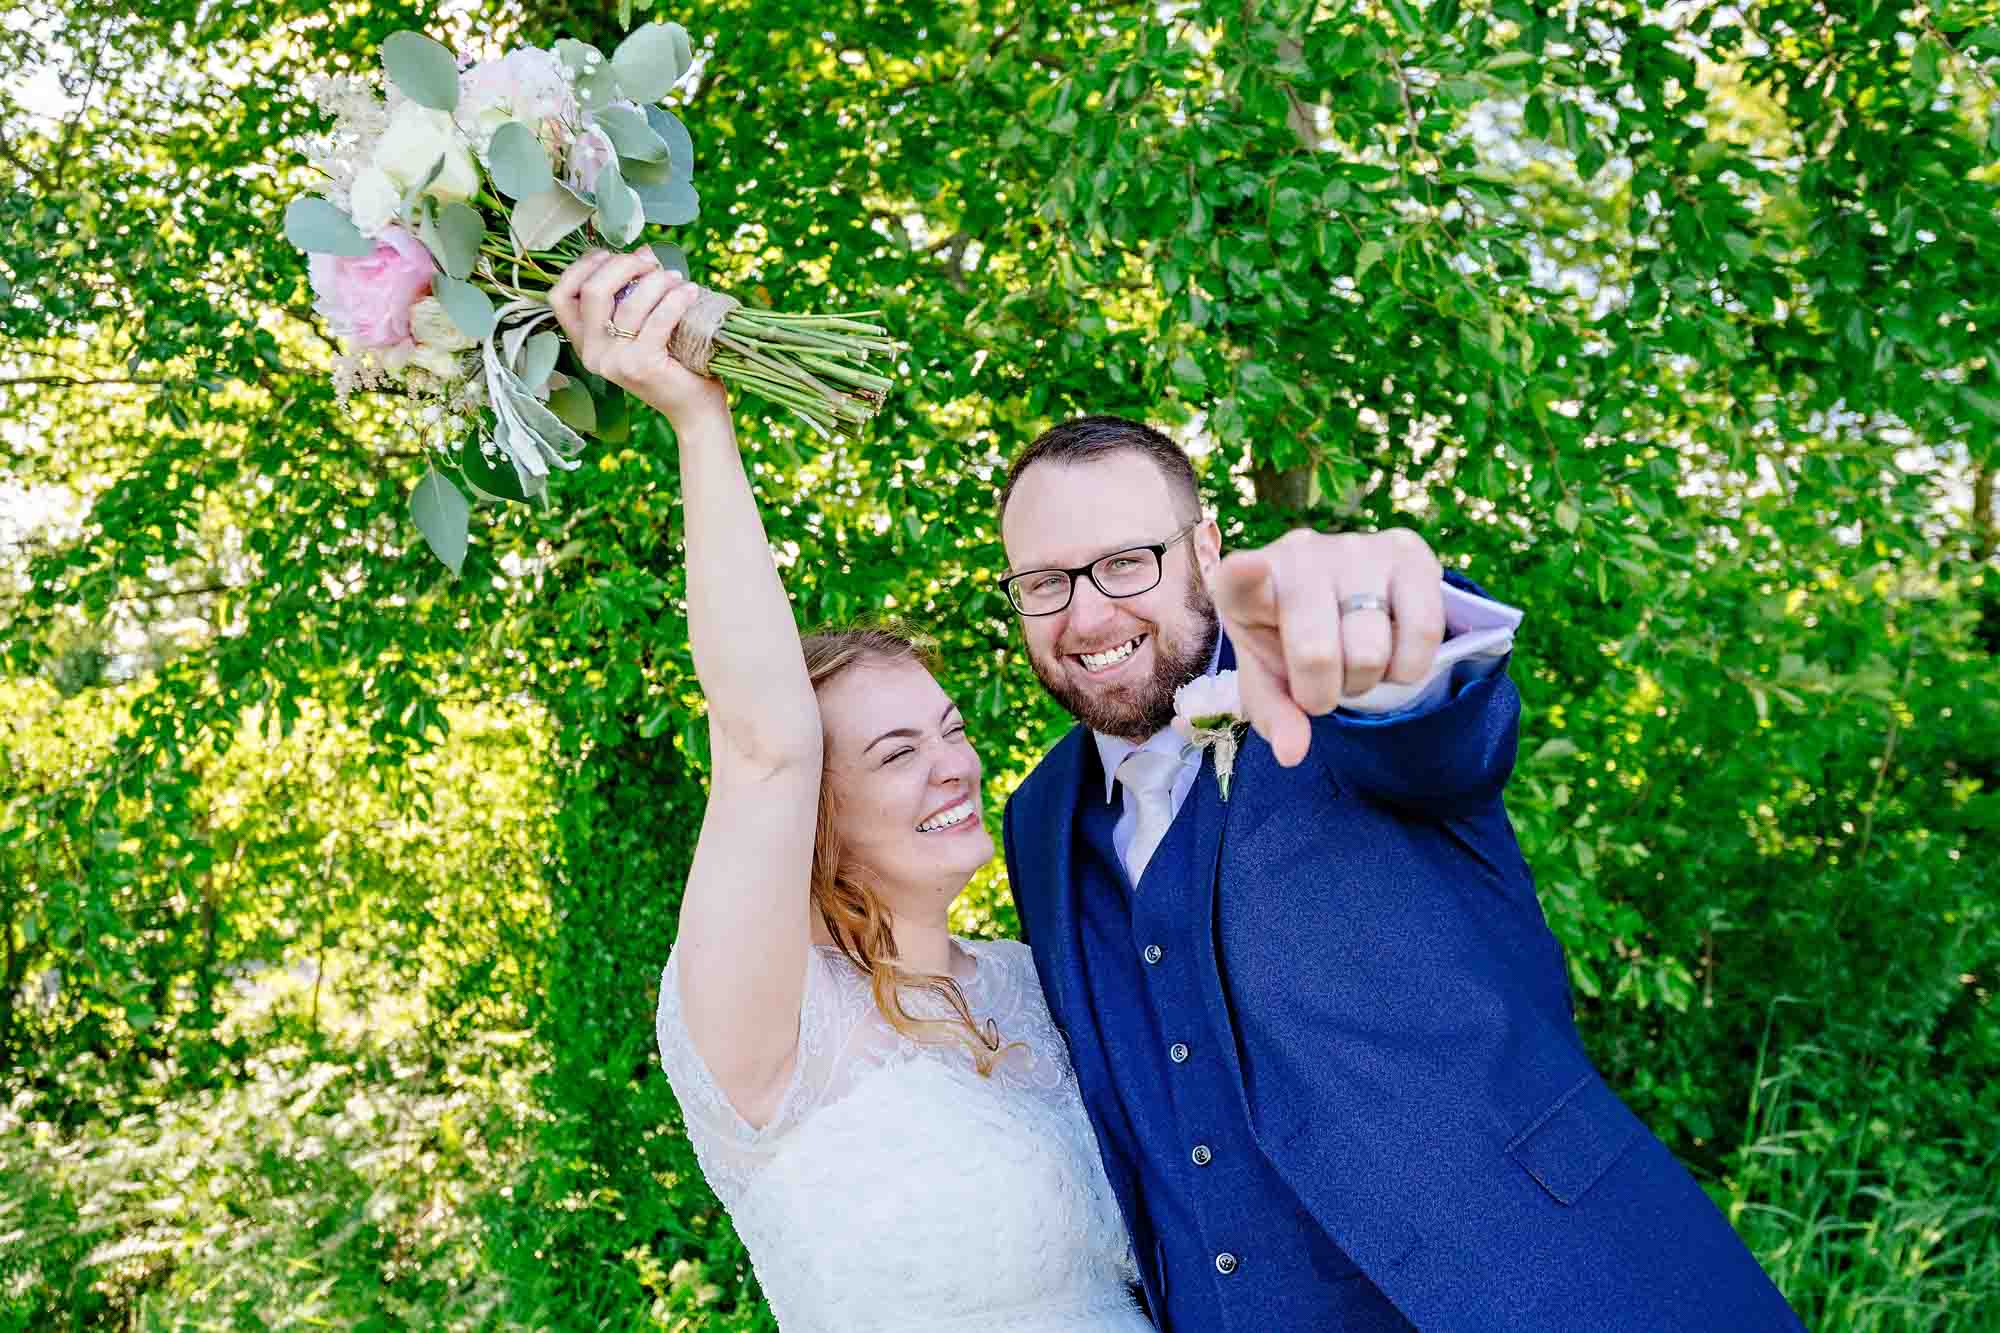 Portrait of bride and groom with groom pointing at the camera and bride holding bouquet in the air